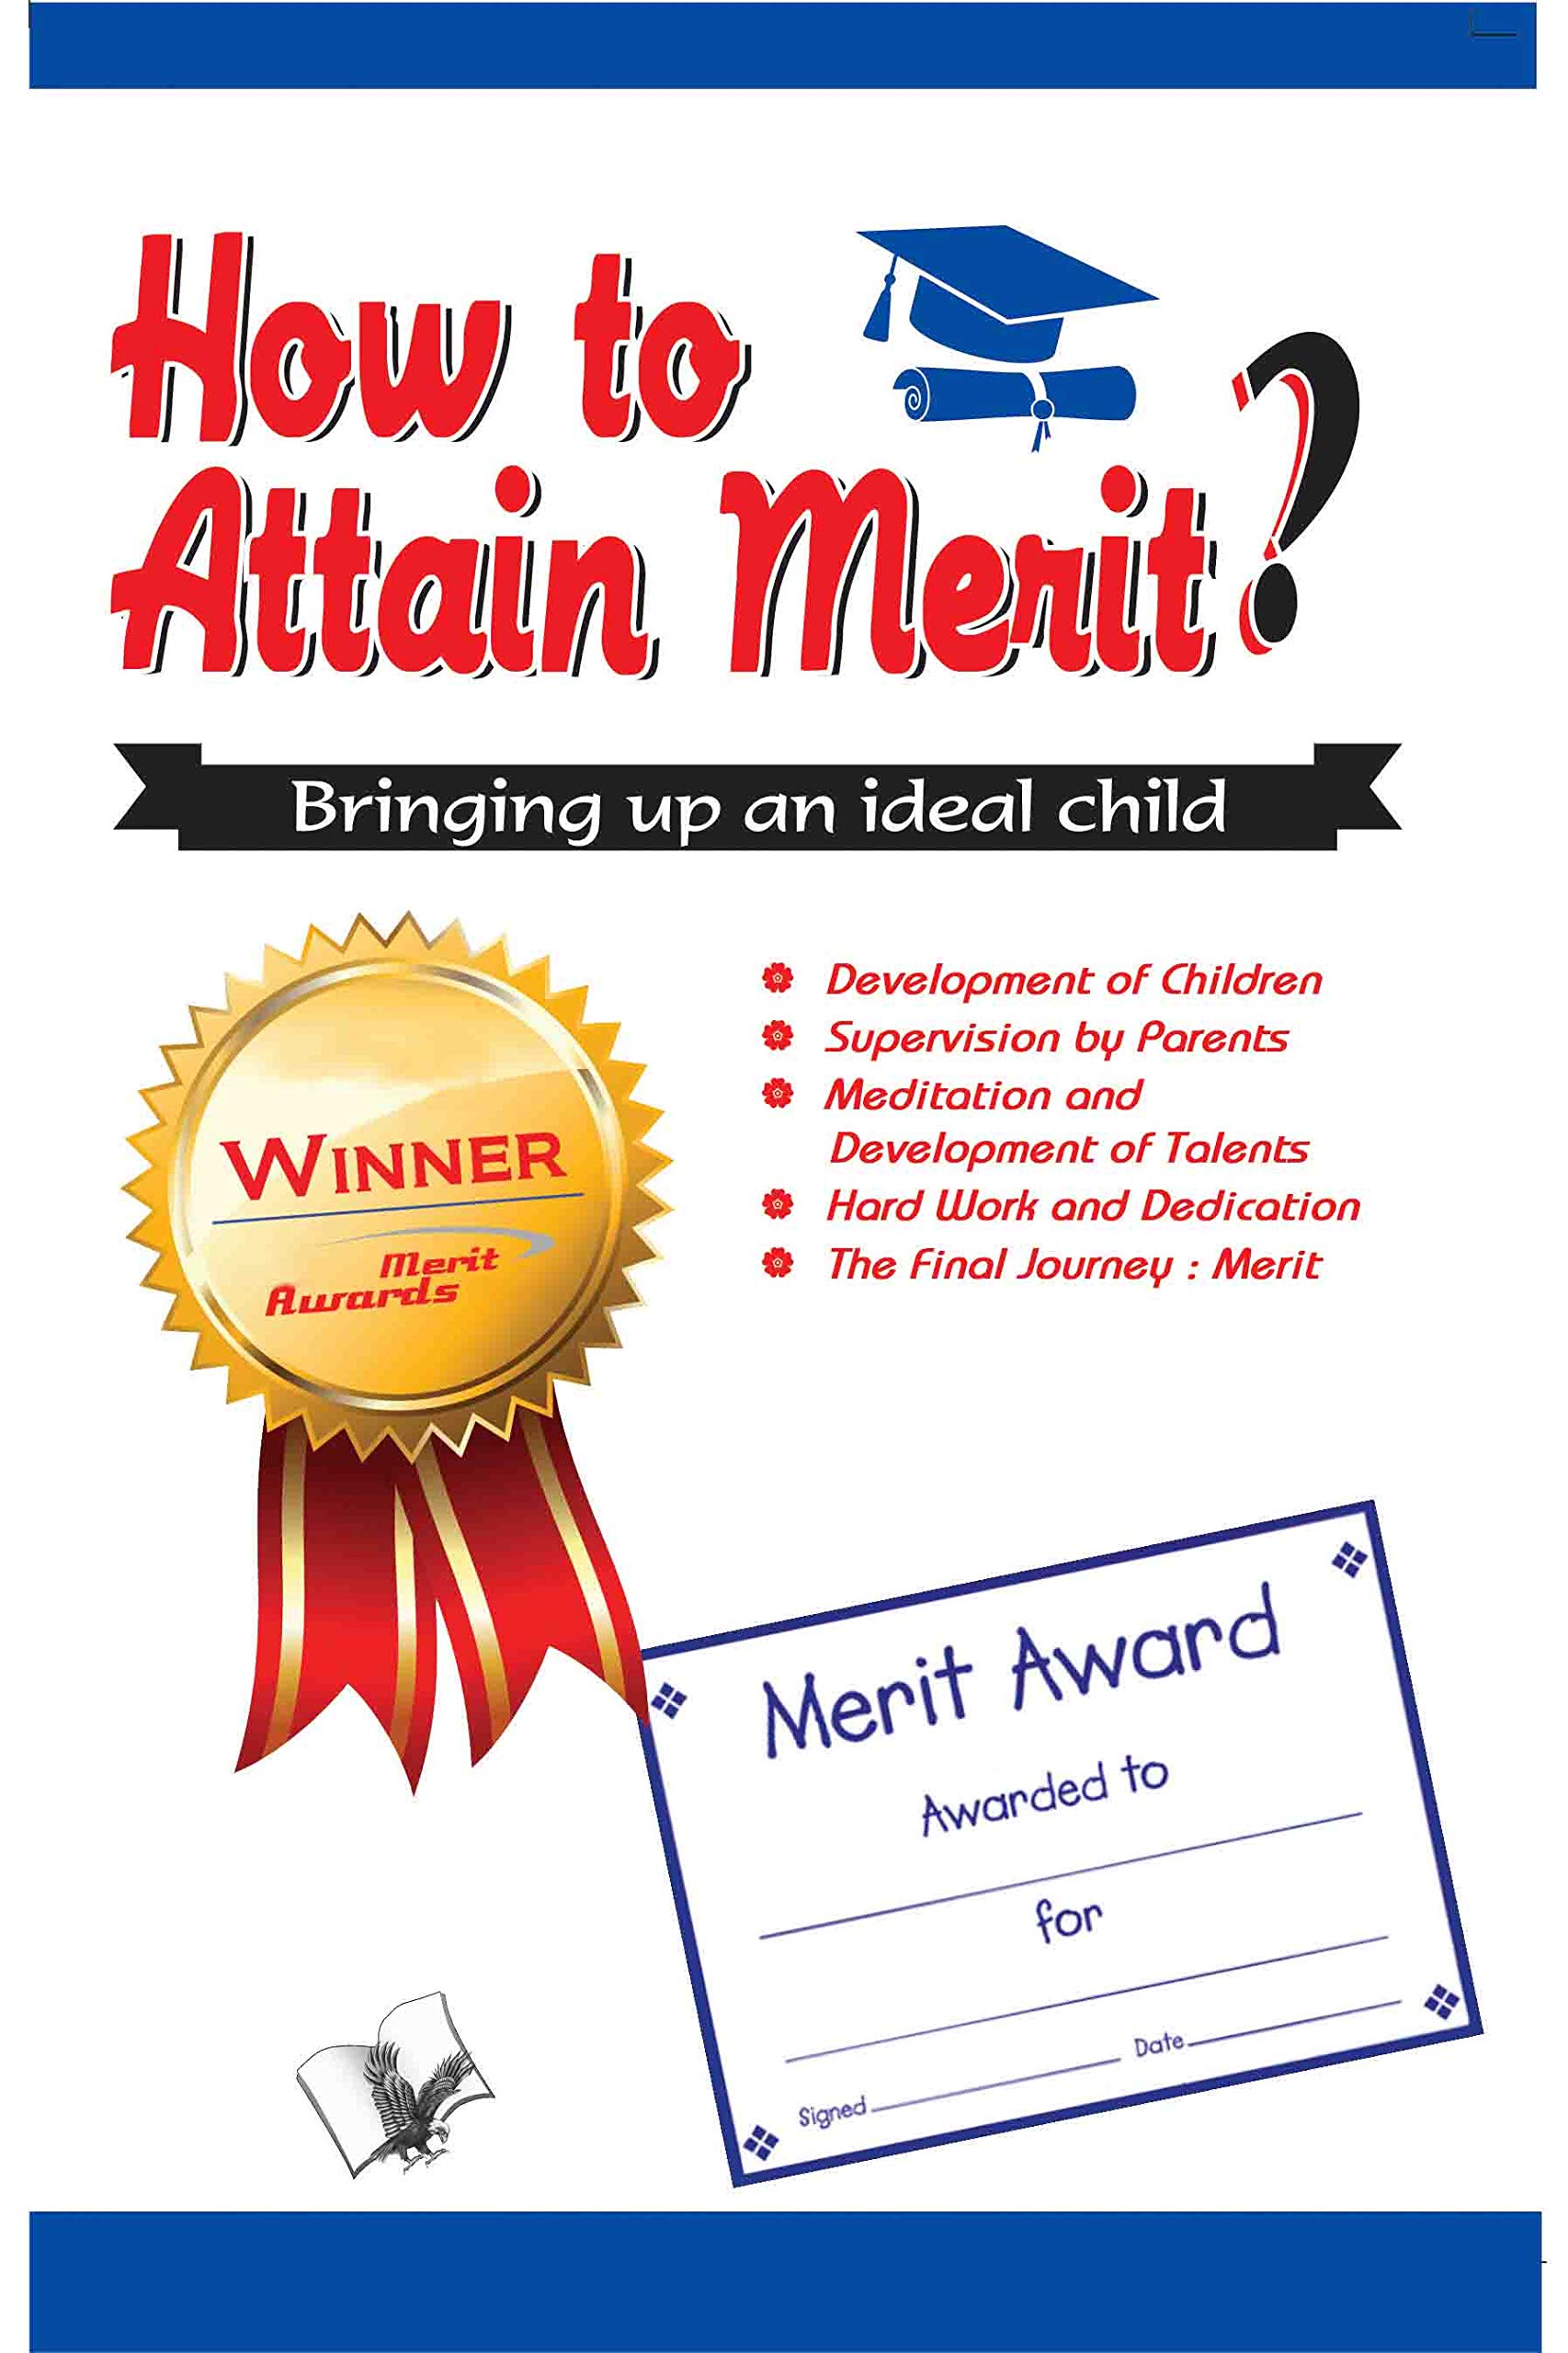 HOW TO ATTAIN MERIT: BRINGING UP AN IDEAL CHILD